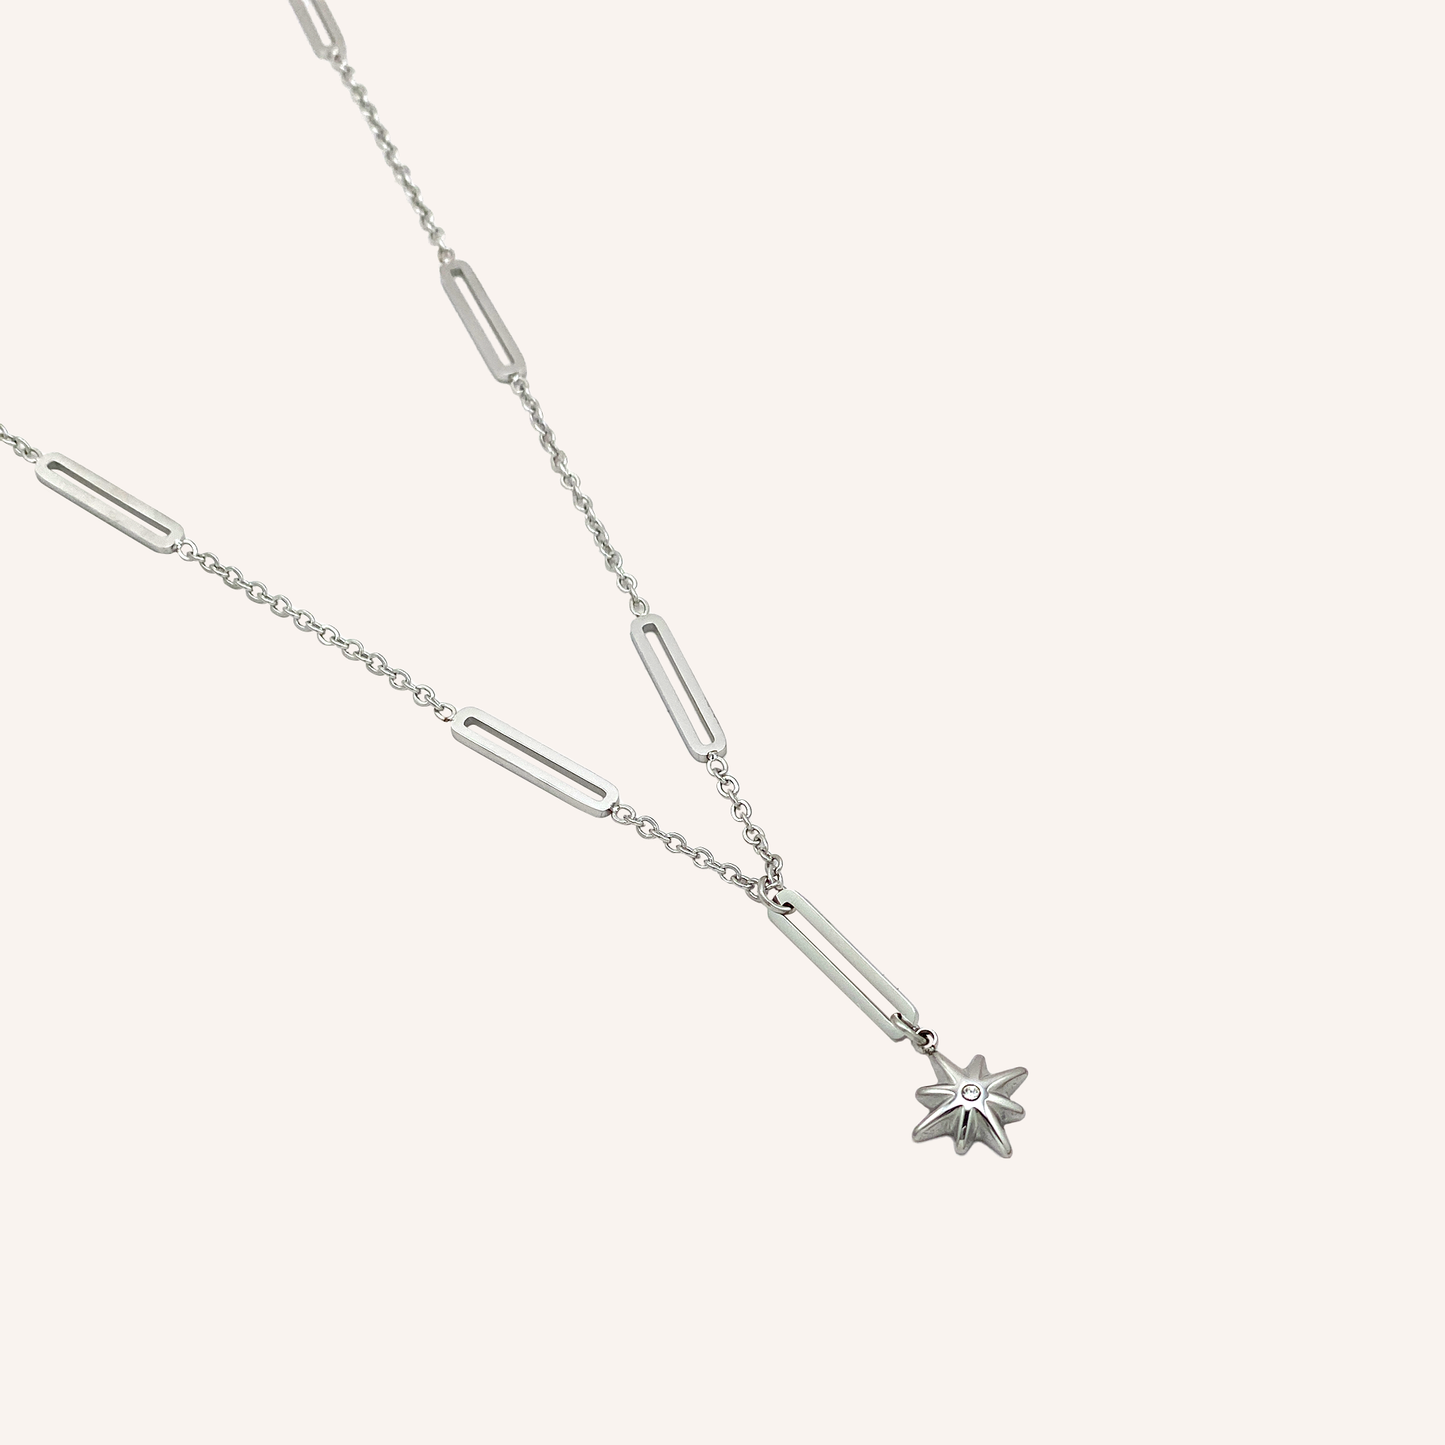 Ankaa Star Chain Link Necklace - Silver